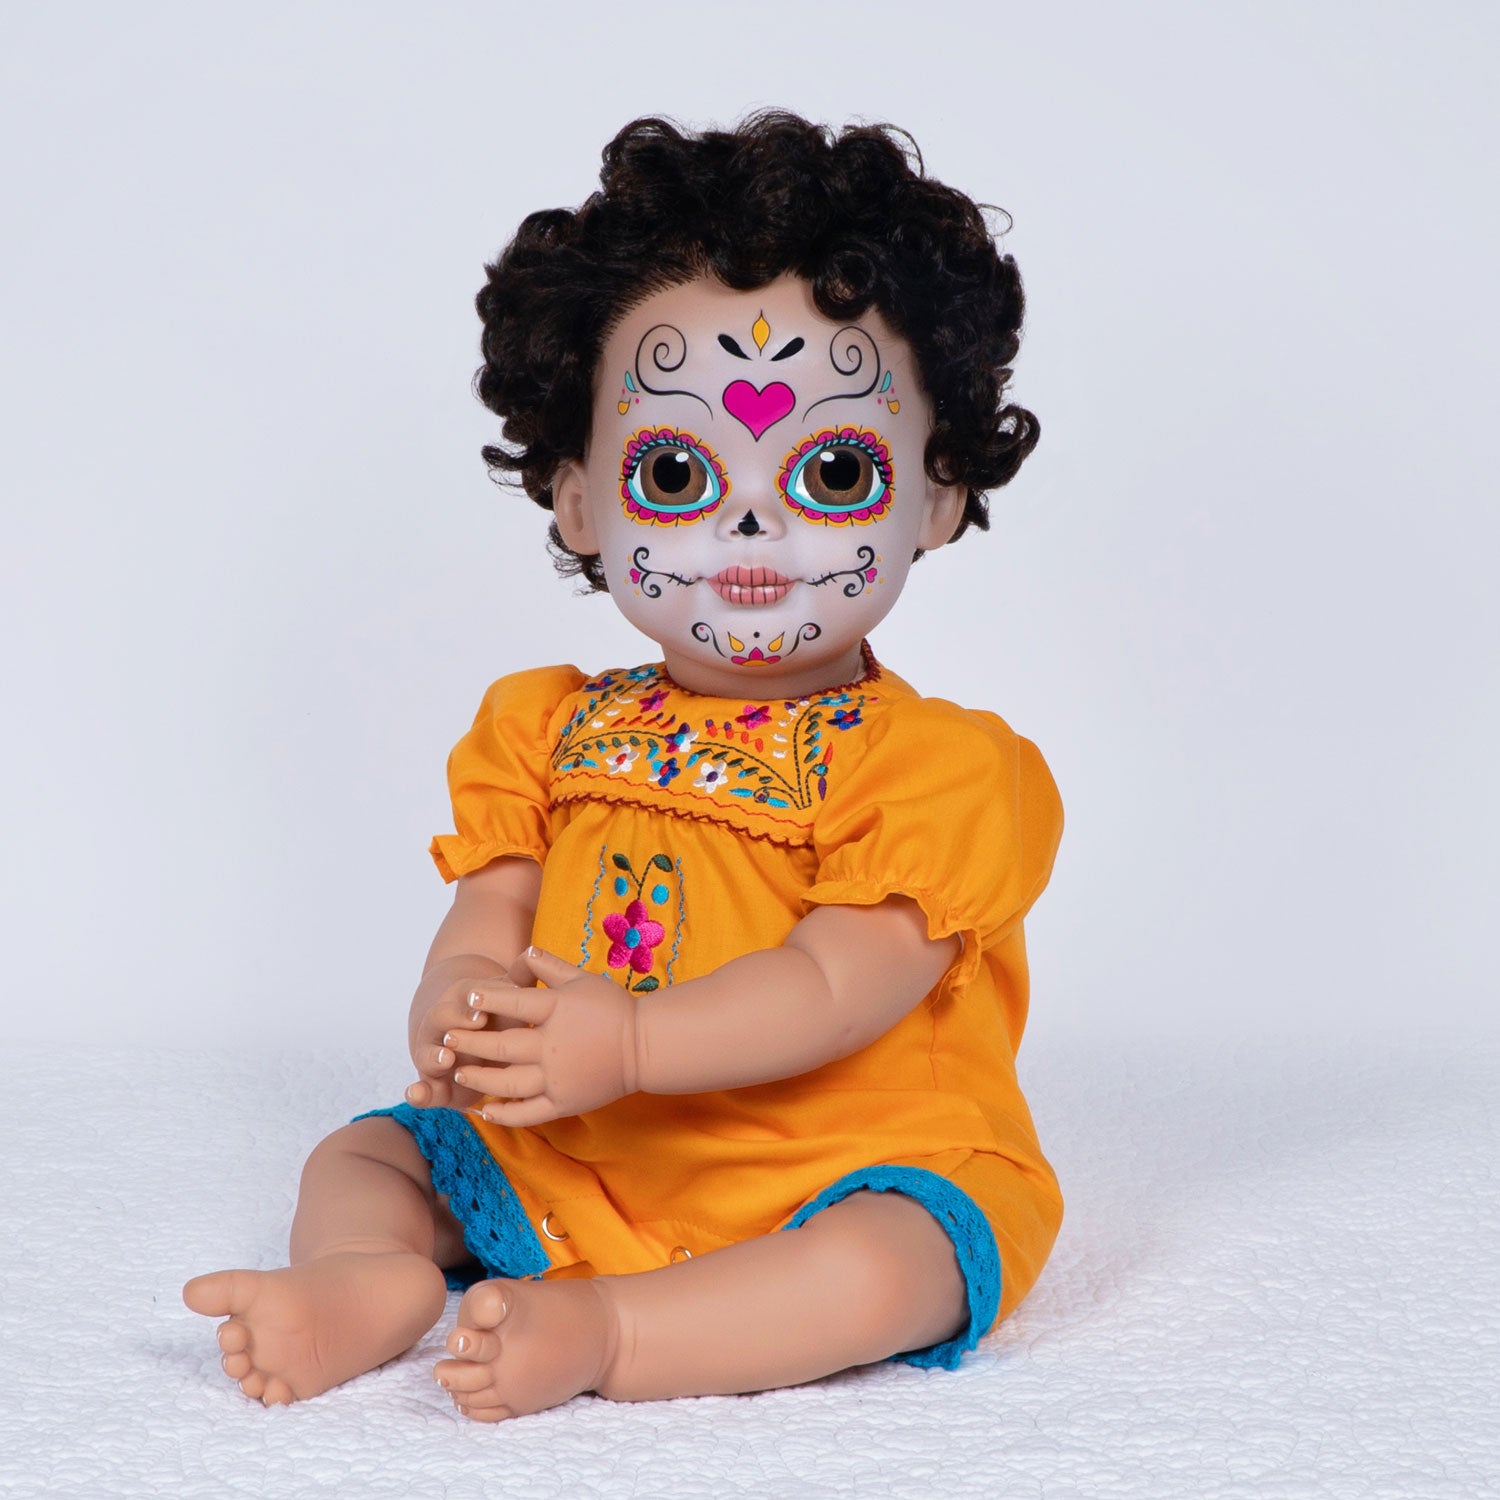 Paradise Galleries Azuquita - Realistic Toddler Doll in Celebration of Dia De Los Muertos (Day of the Dead Holiday), 20 Inch Calavera (Sugar Skull) Reborn Doll in GentleTouch Vinyl